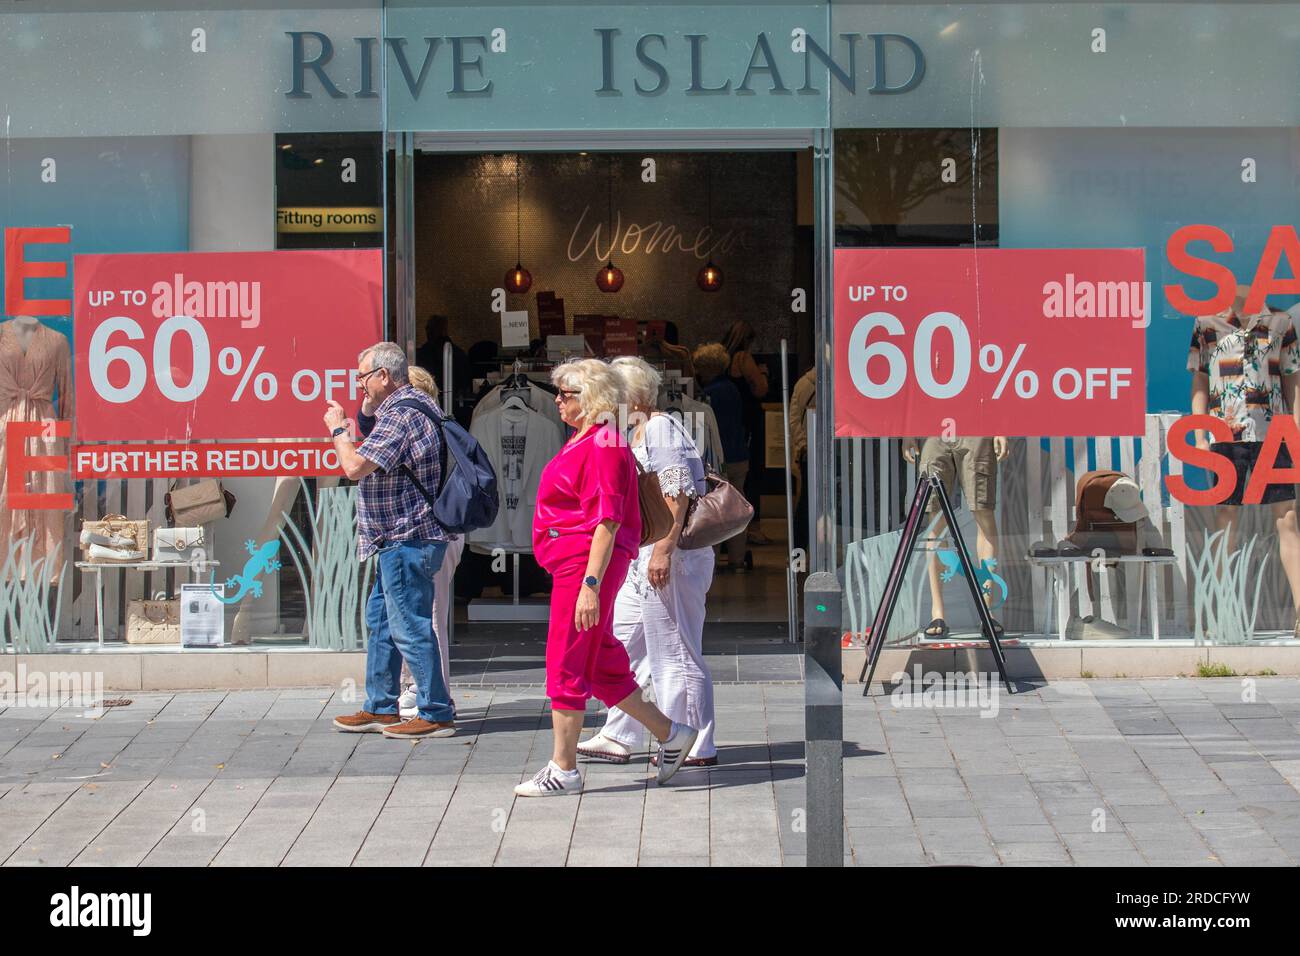 River Island Sale, Shop & Shoppers, Fashion Stores with summer ...